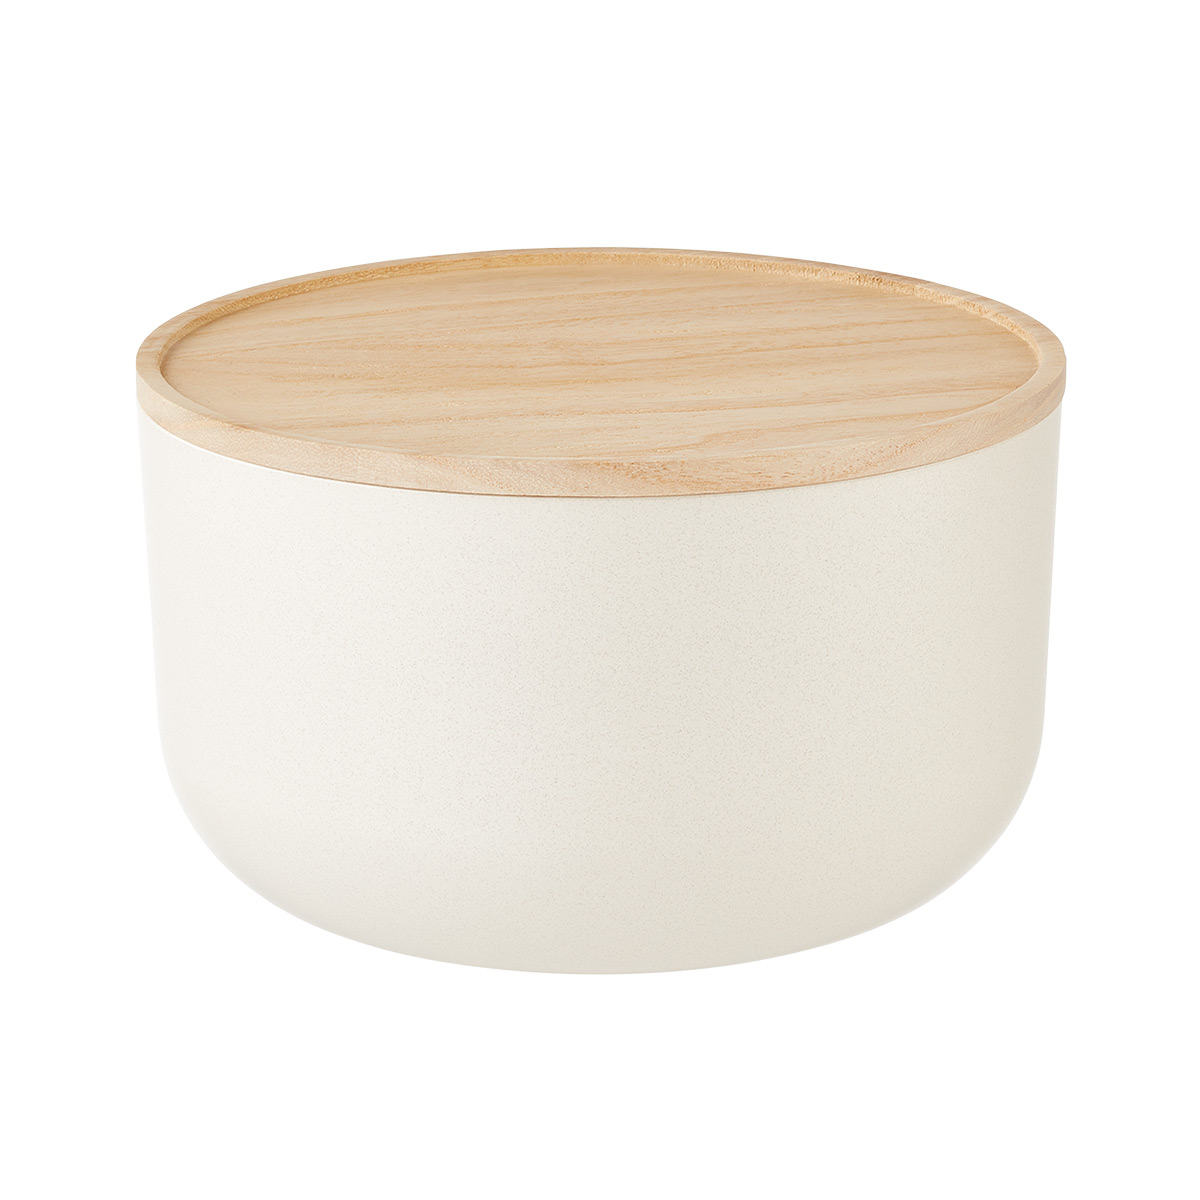 https://www.containerstore.com/catalogimages/451644/10088745_20_Cup_RO_Eco-Friendly_Mixi.jpg